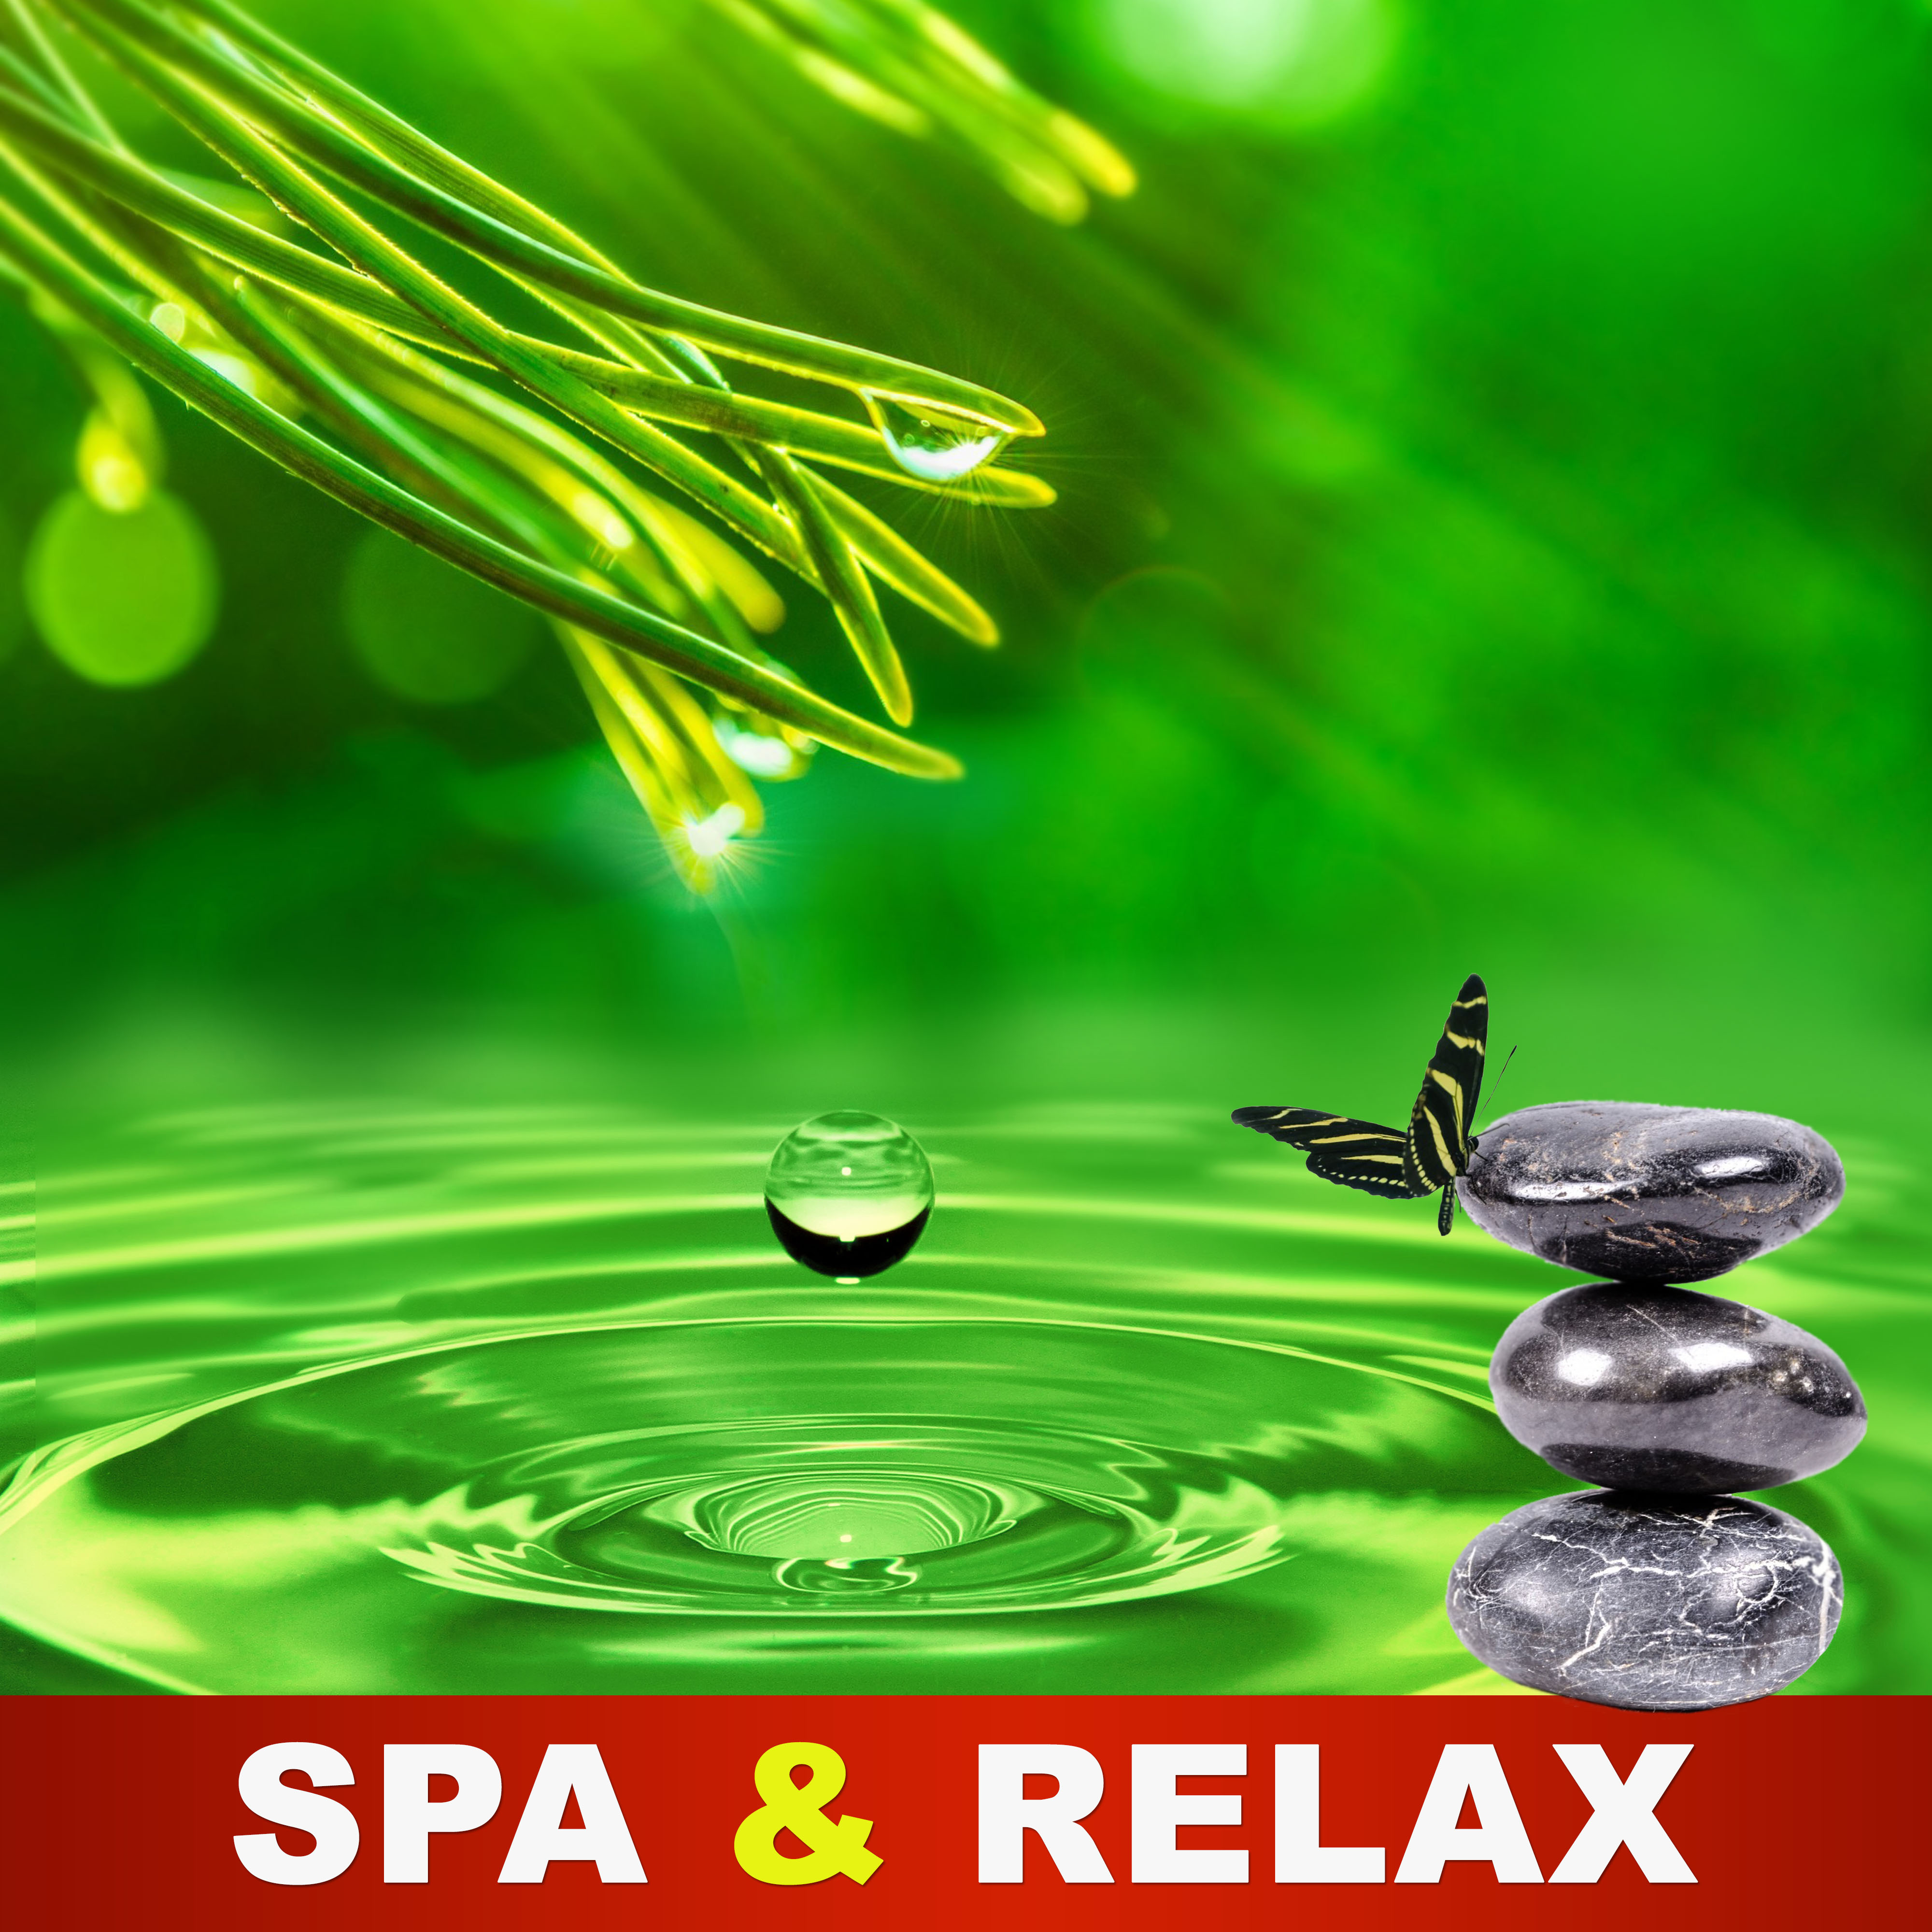 Spa  Relax  Gentle Music for Relaxation While Spa Treatments, Sensuality Sounds to Wellness, Massage